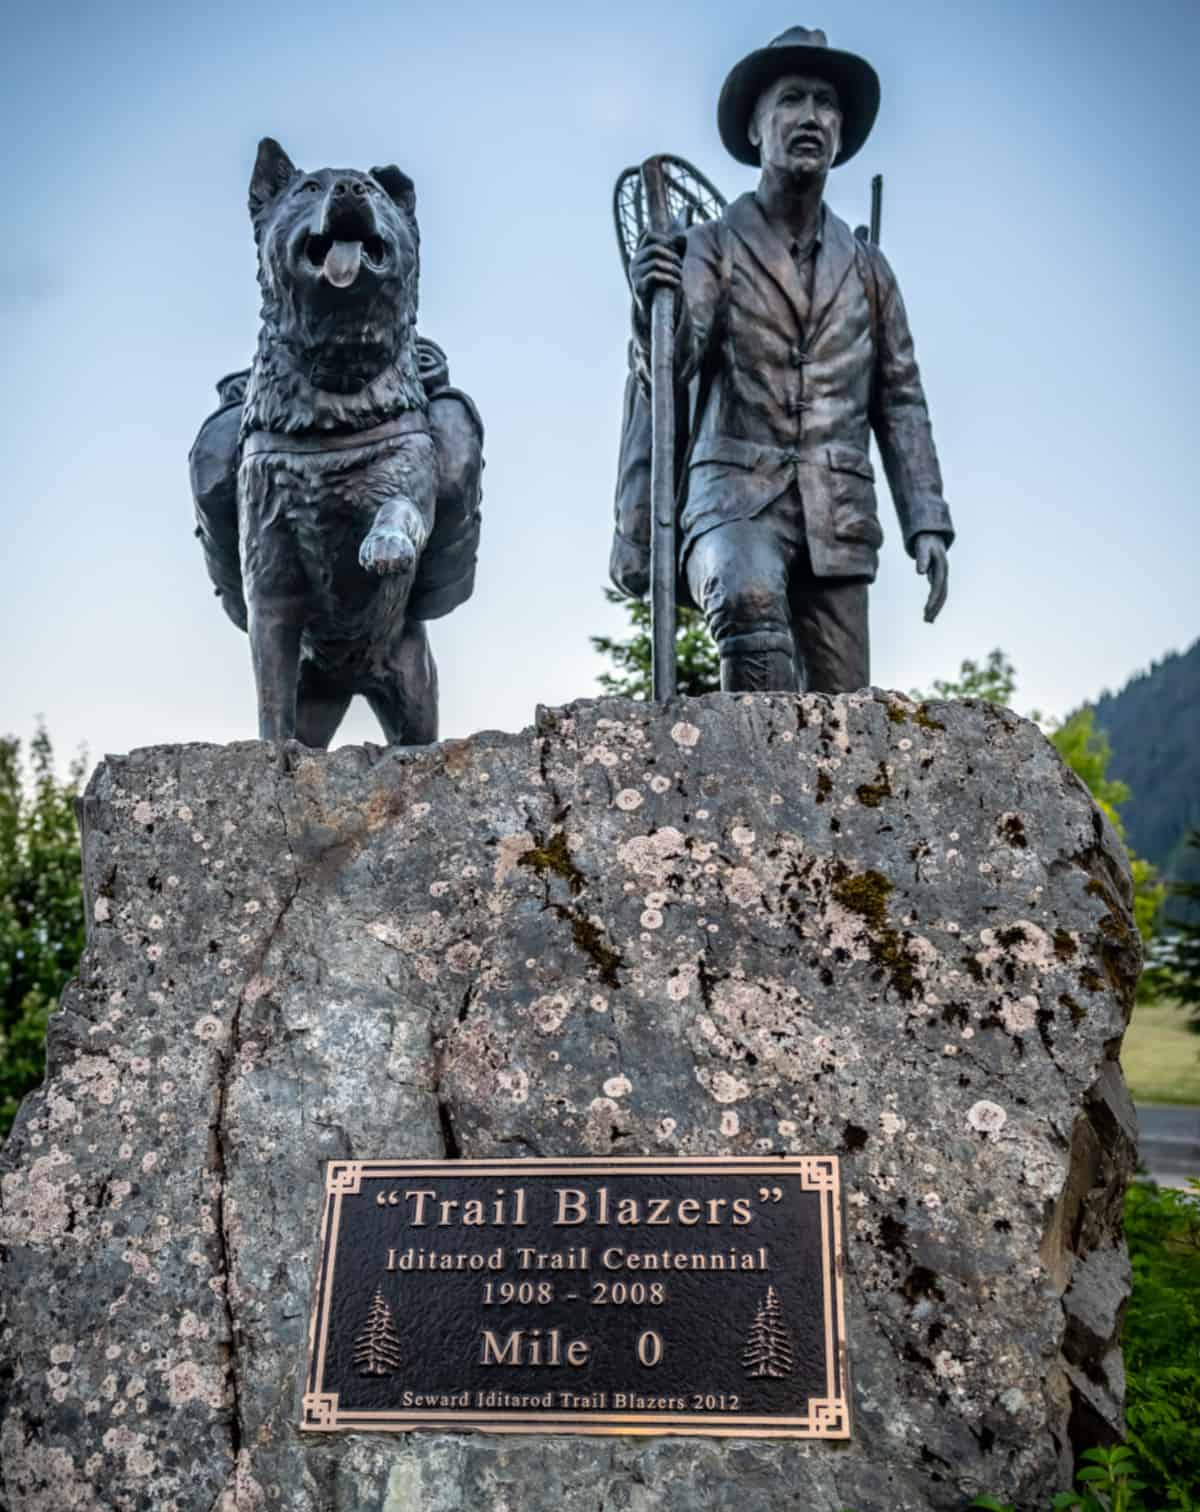 Monument commemorating the centennial the Iditarod called “Trail Blazers” 